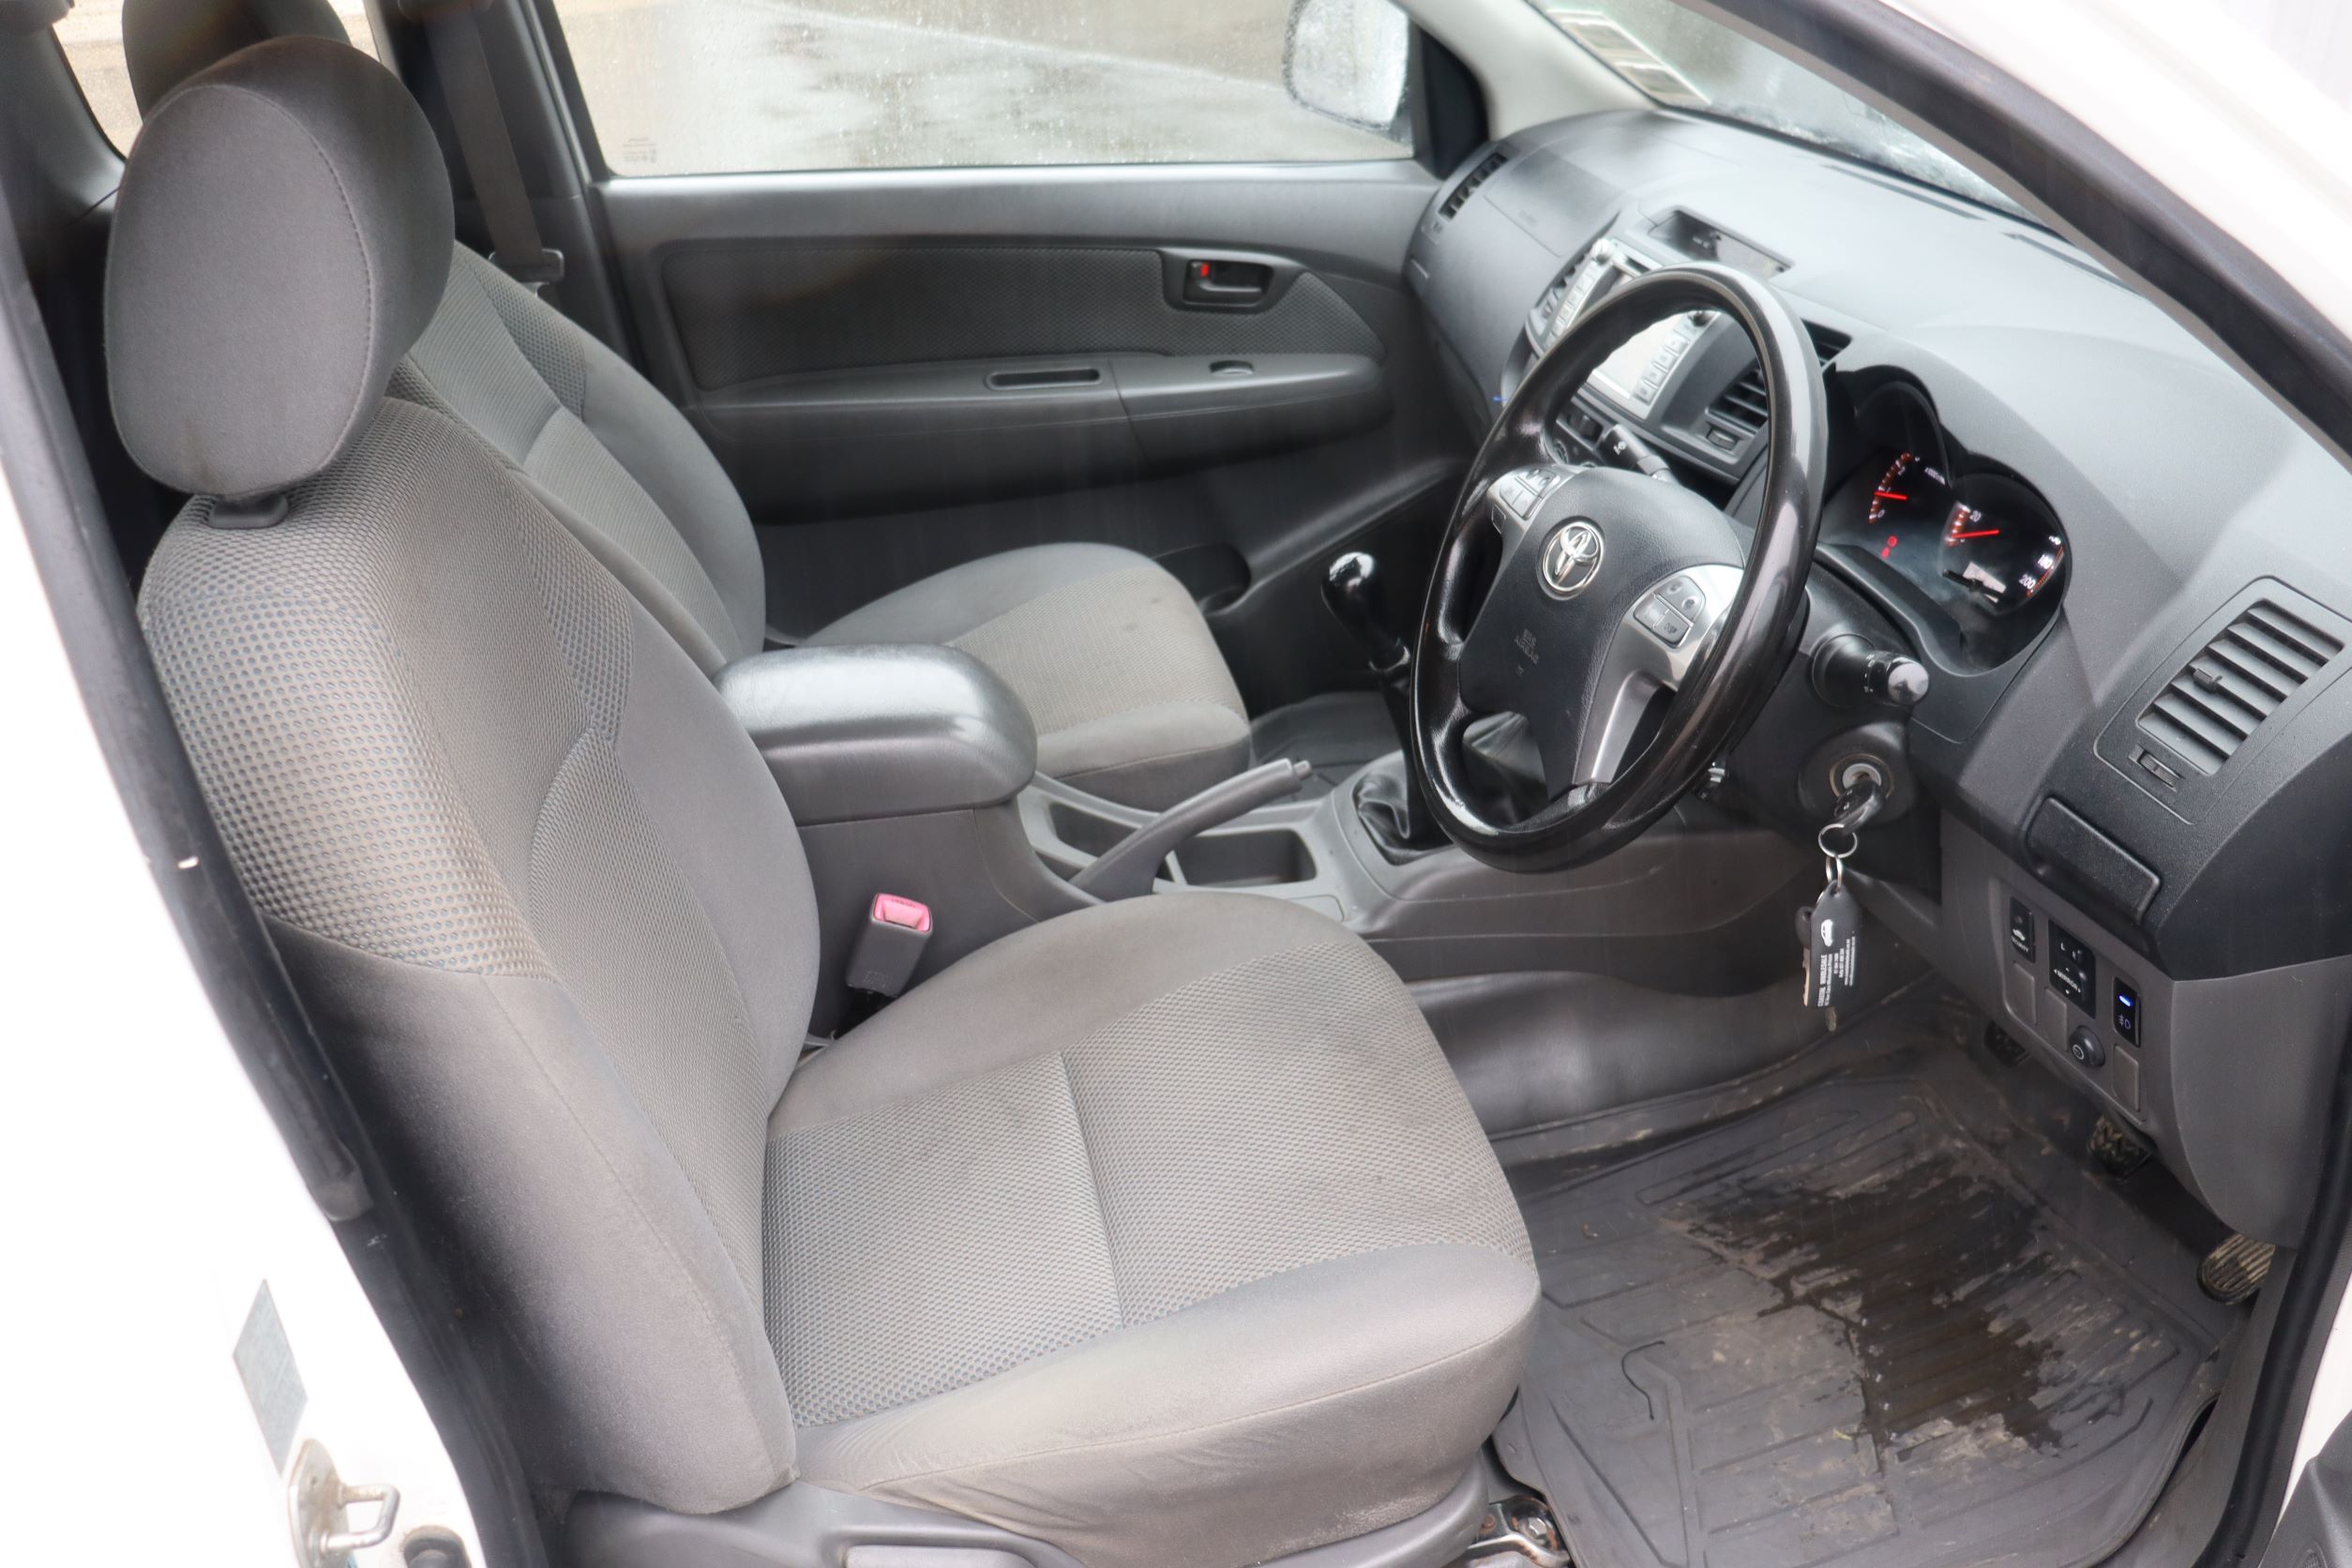 Toyota Hilux CAMCO SET UP 2014 for sale in Auckland